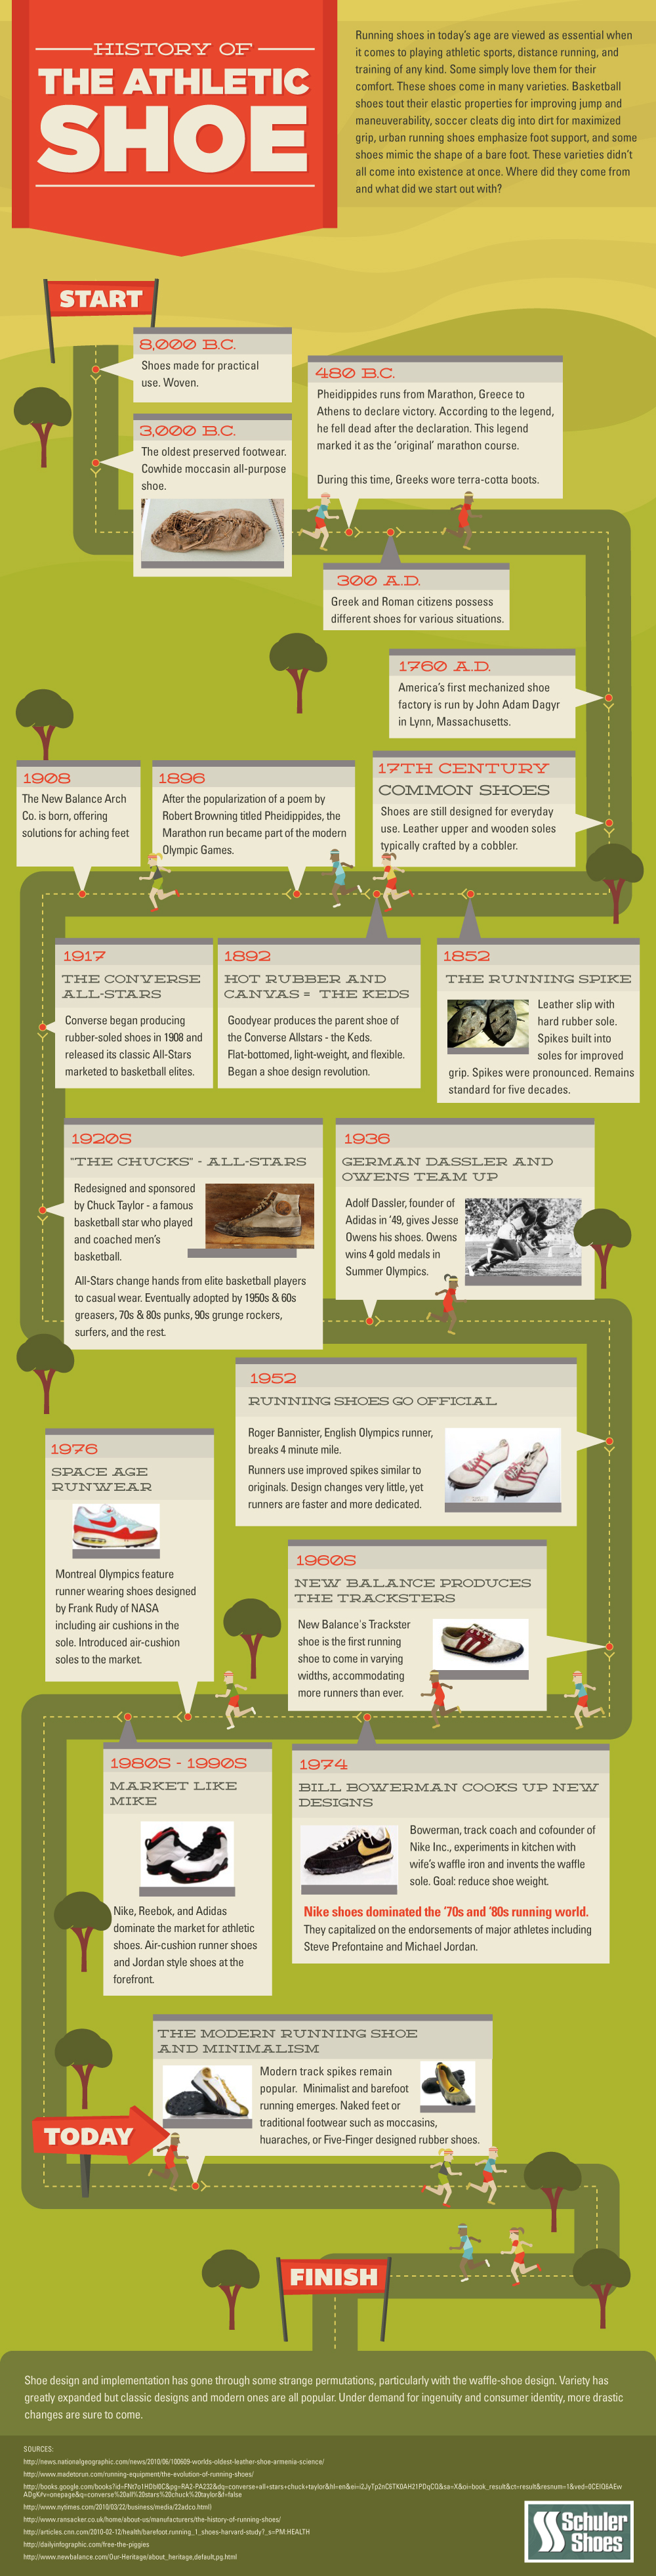 The History of the Athletic Shoe